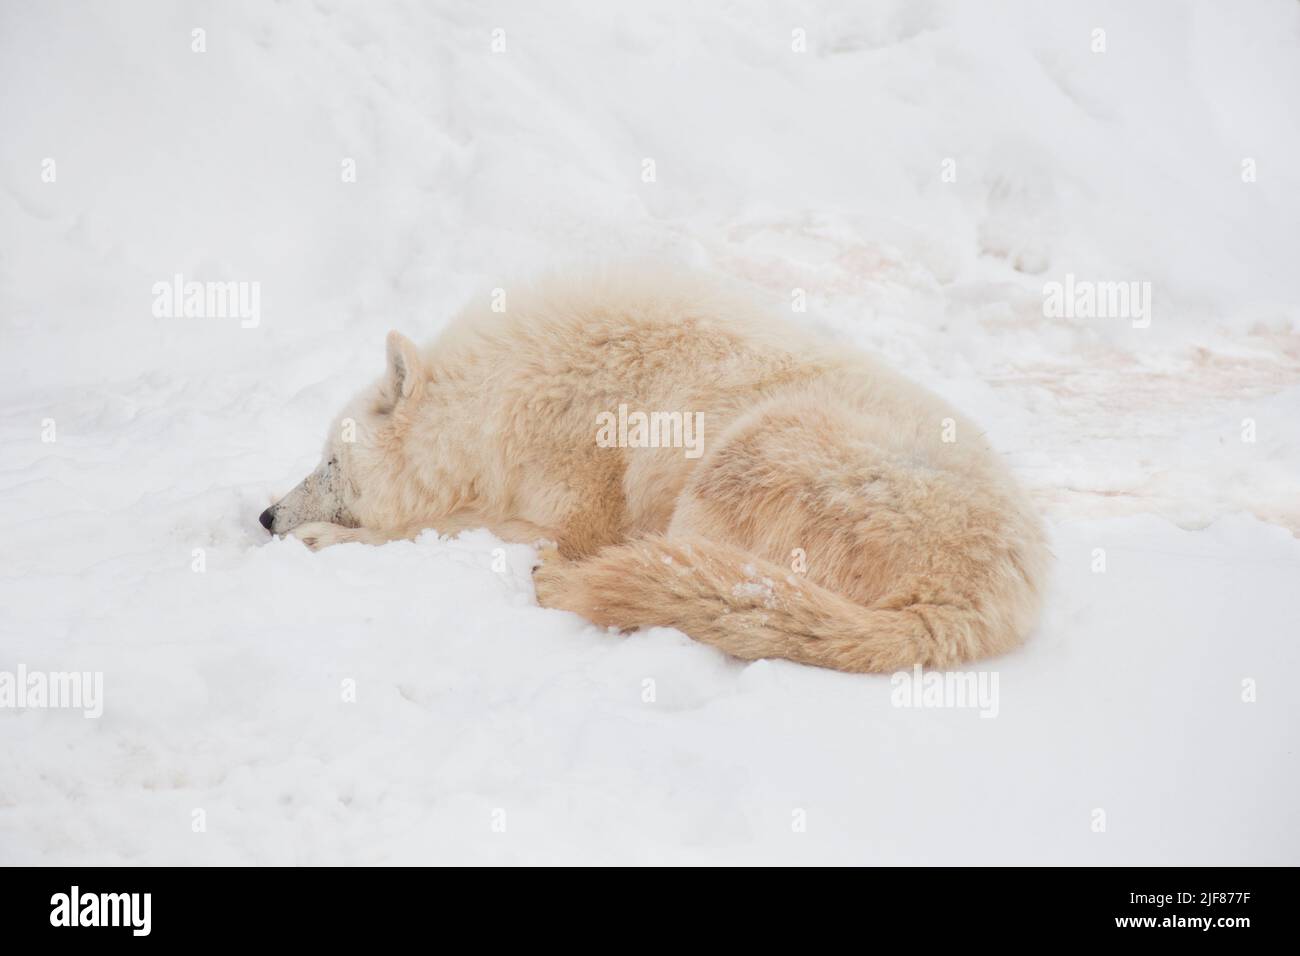 Wild polar wolf is lying and sleeping on white snow. Canis lupus arctos. White wolf or alaskan tundra wolf. Animals in wildlife. Stock Photo